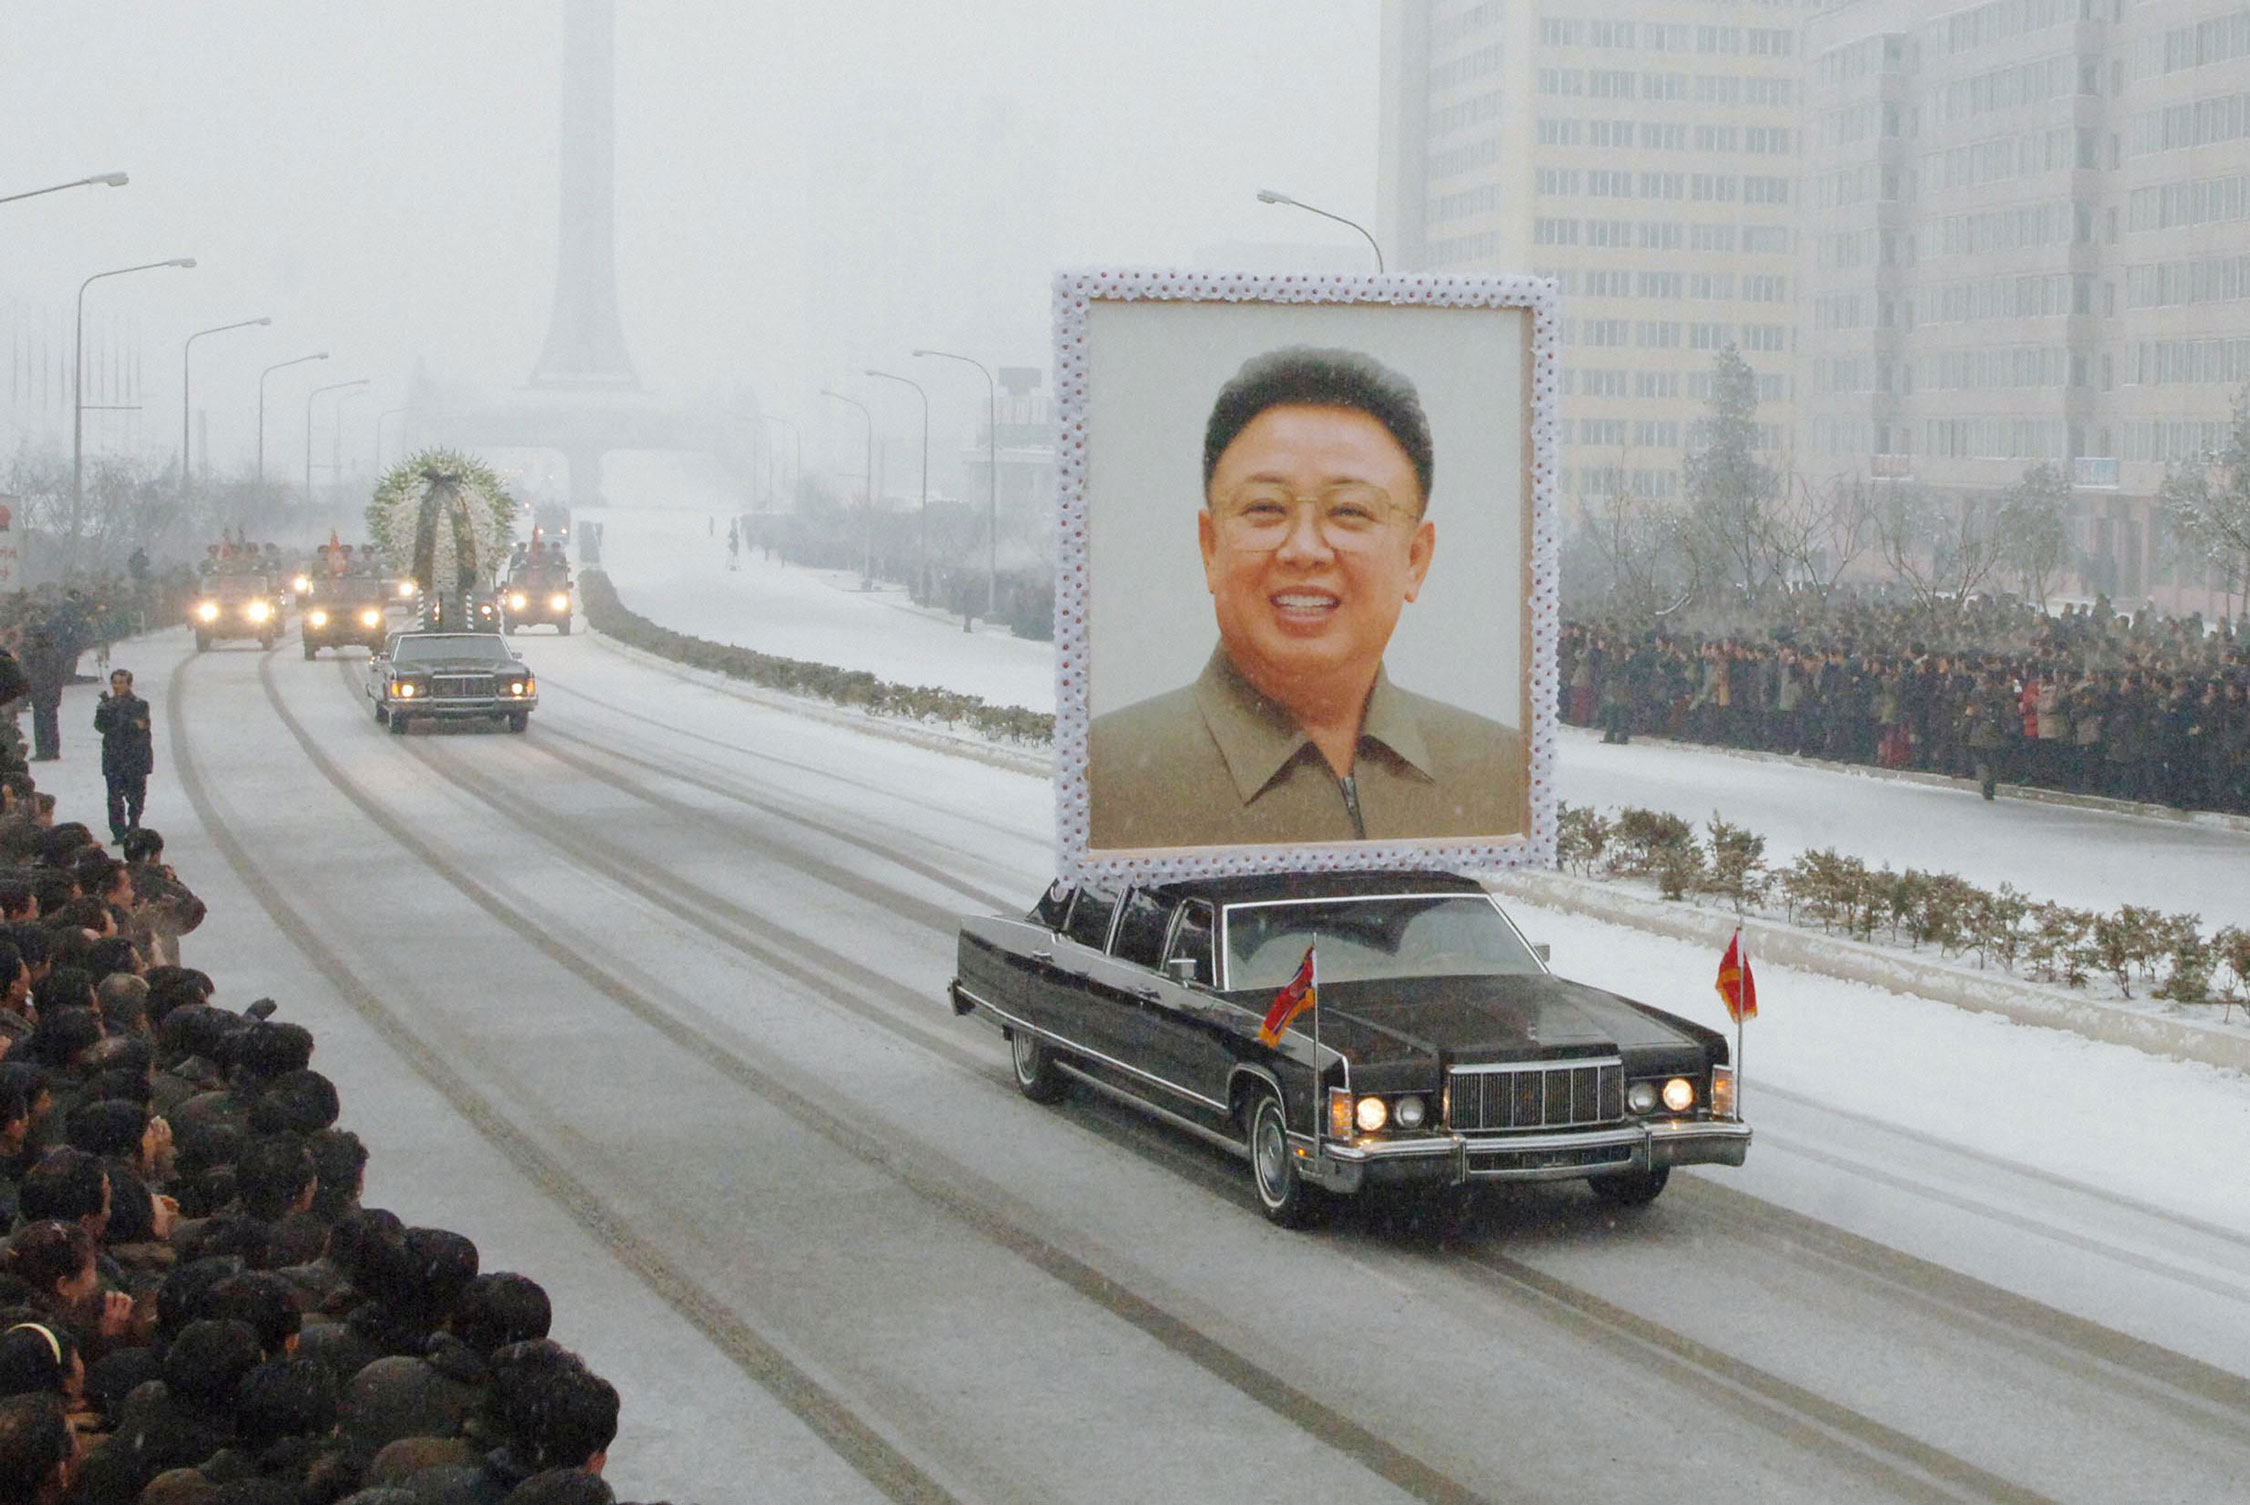 The funeral motorcade including a car exhibiting a large portrait of the late Kim Jong Il drives through Pyongyang on a snowy road on December 28, 2011.